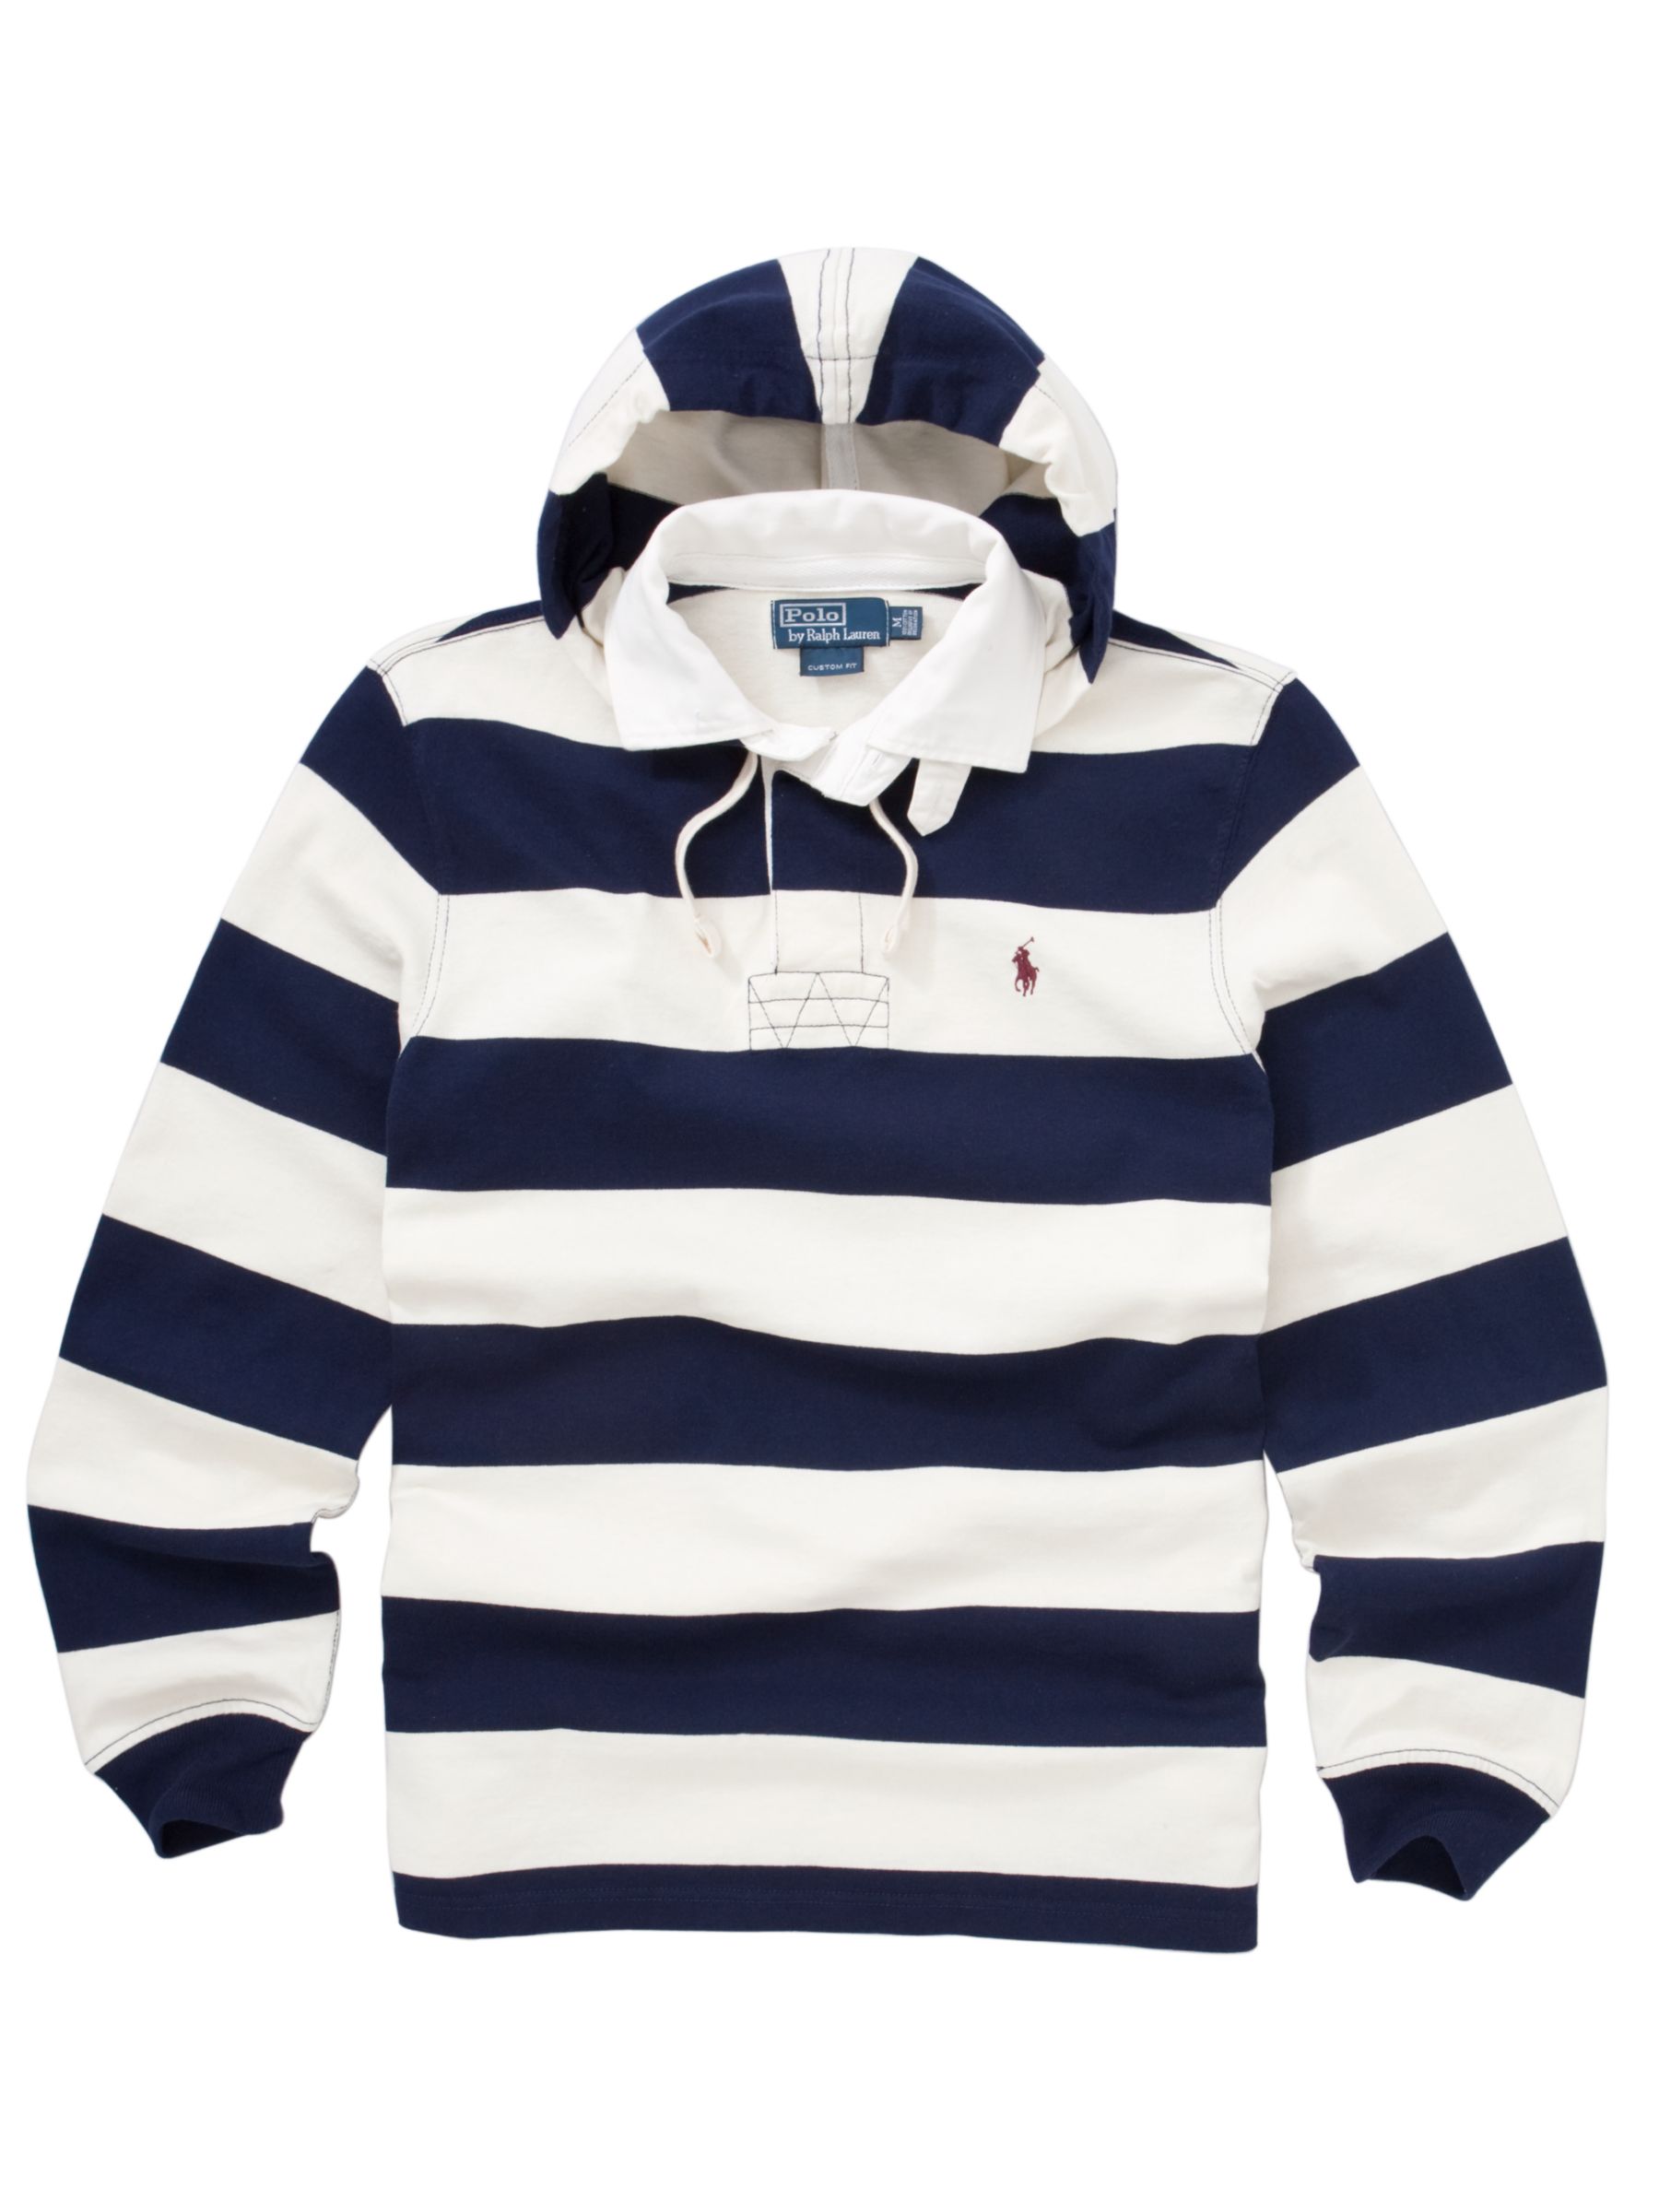 Rugby Shirt Hoodie, White/navy